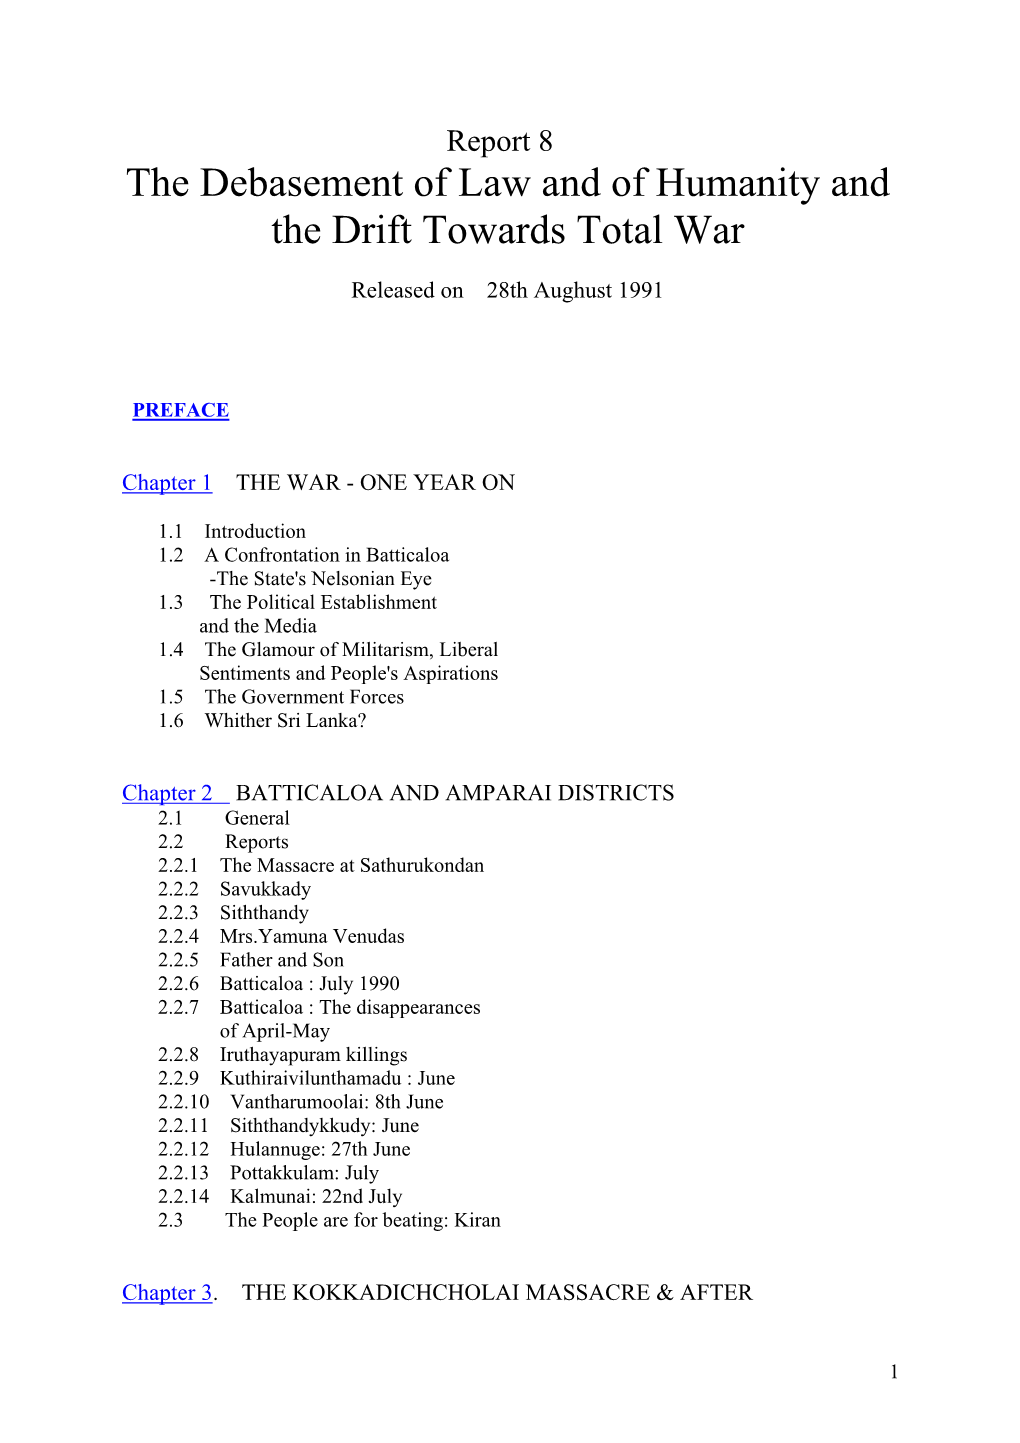 Report 8 the Debasement of Law and of Humanity and the Drift Towards Total War